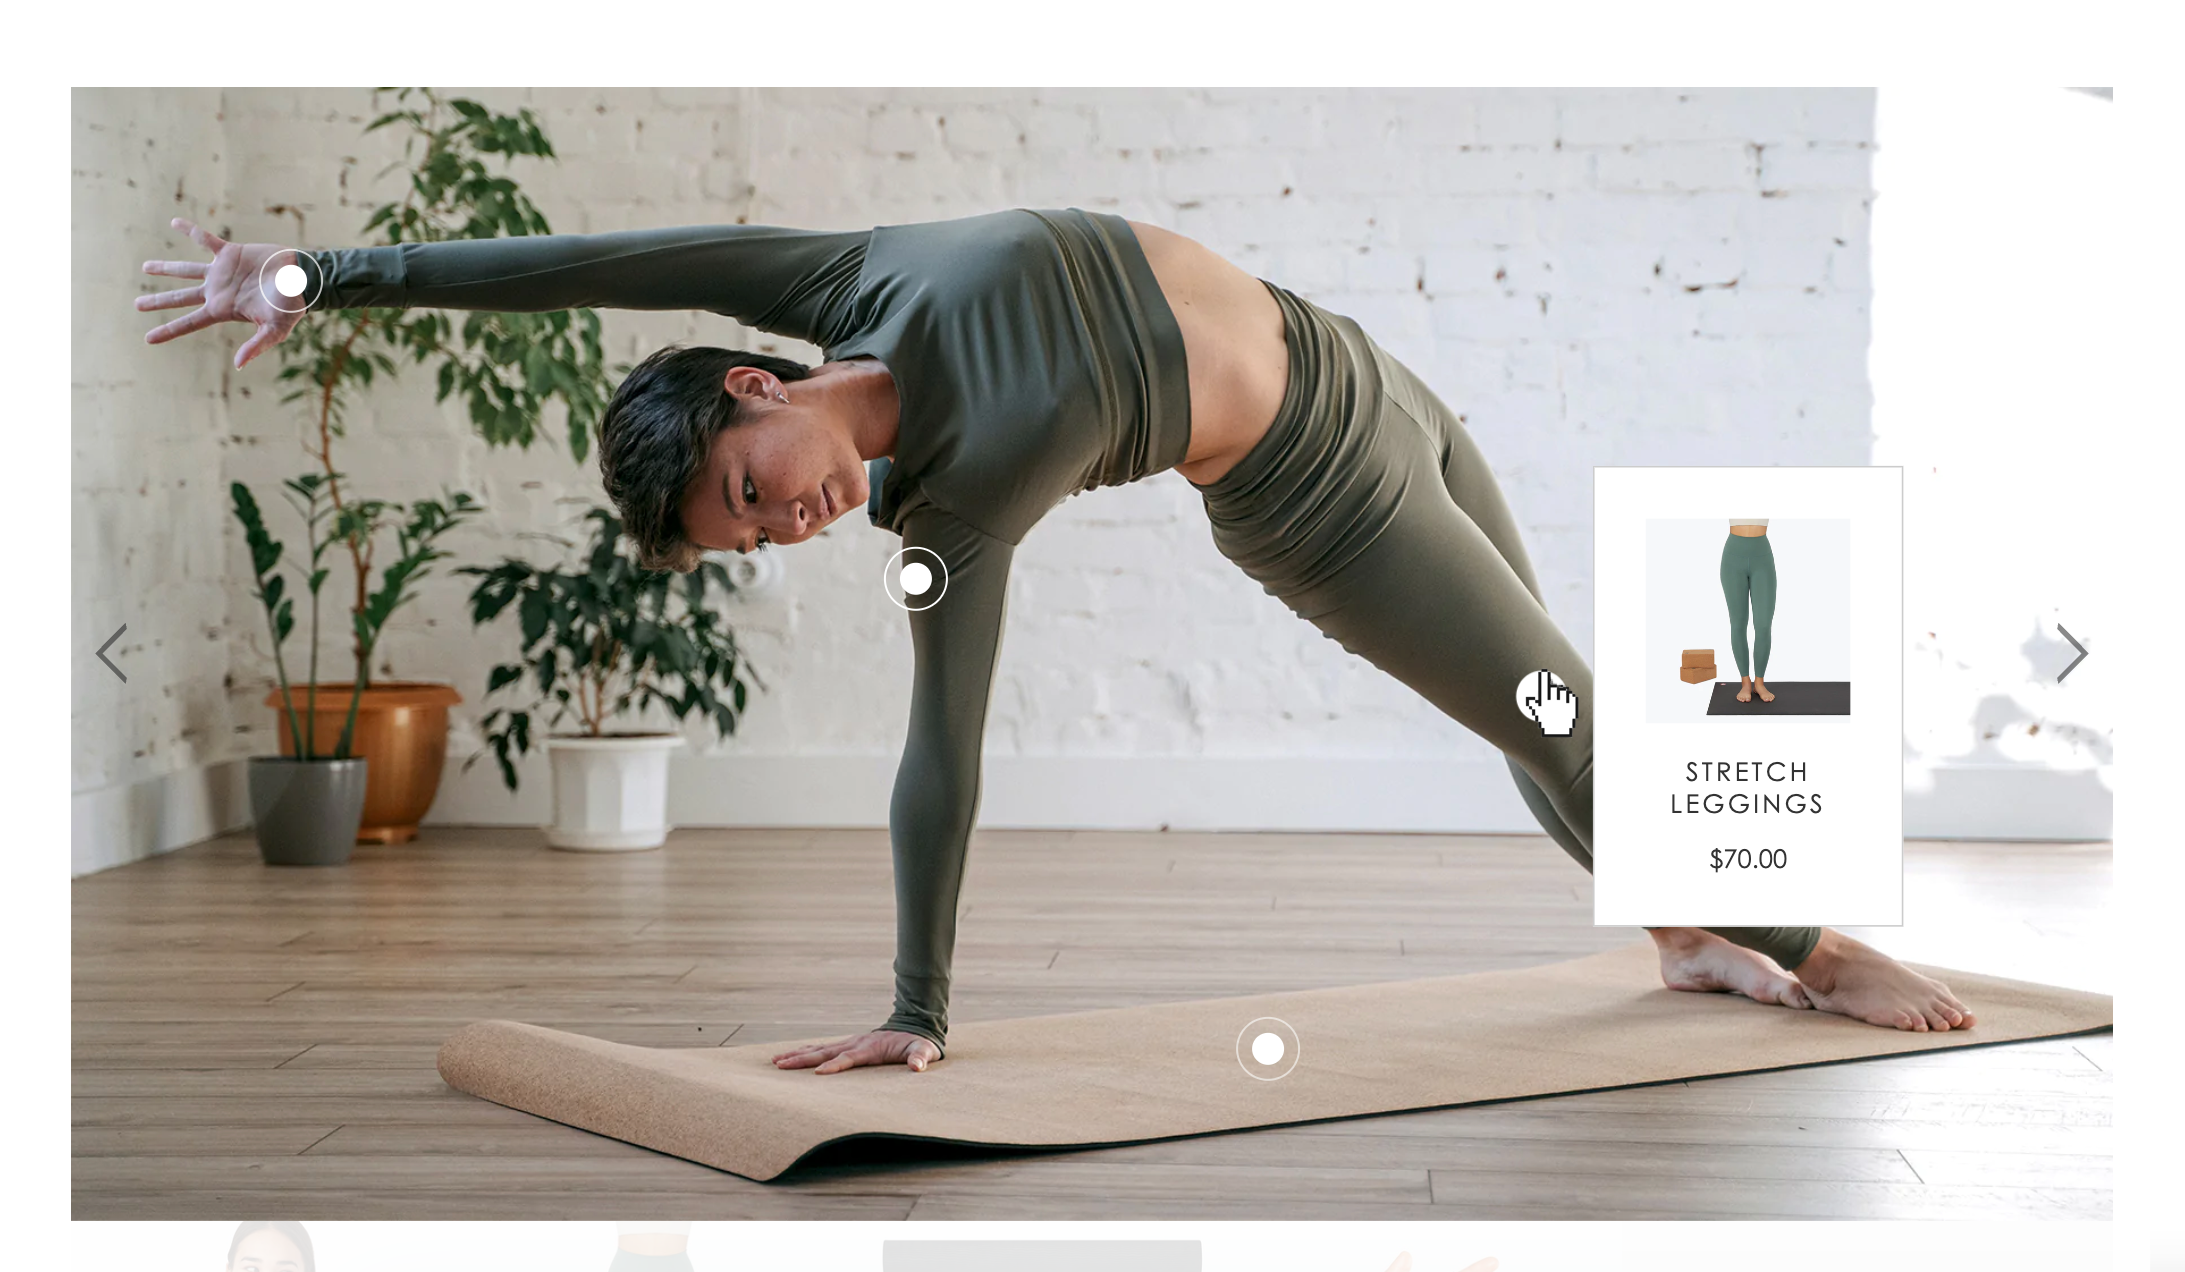 legging product revealed when customer hovers over hotspot in turbo shoppable image.png